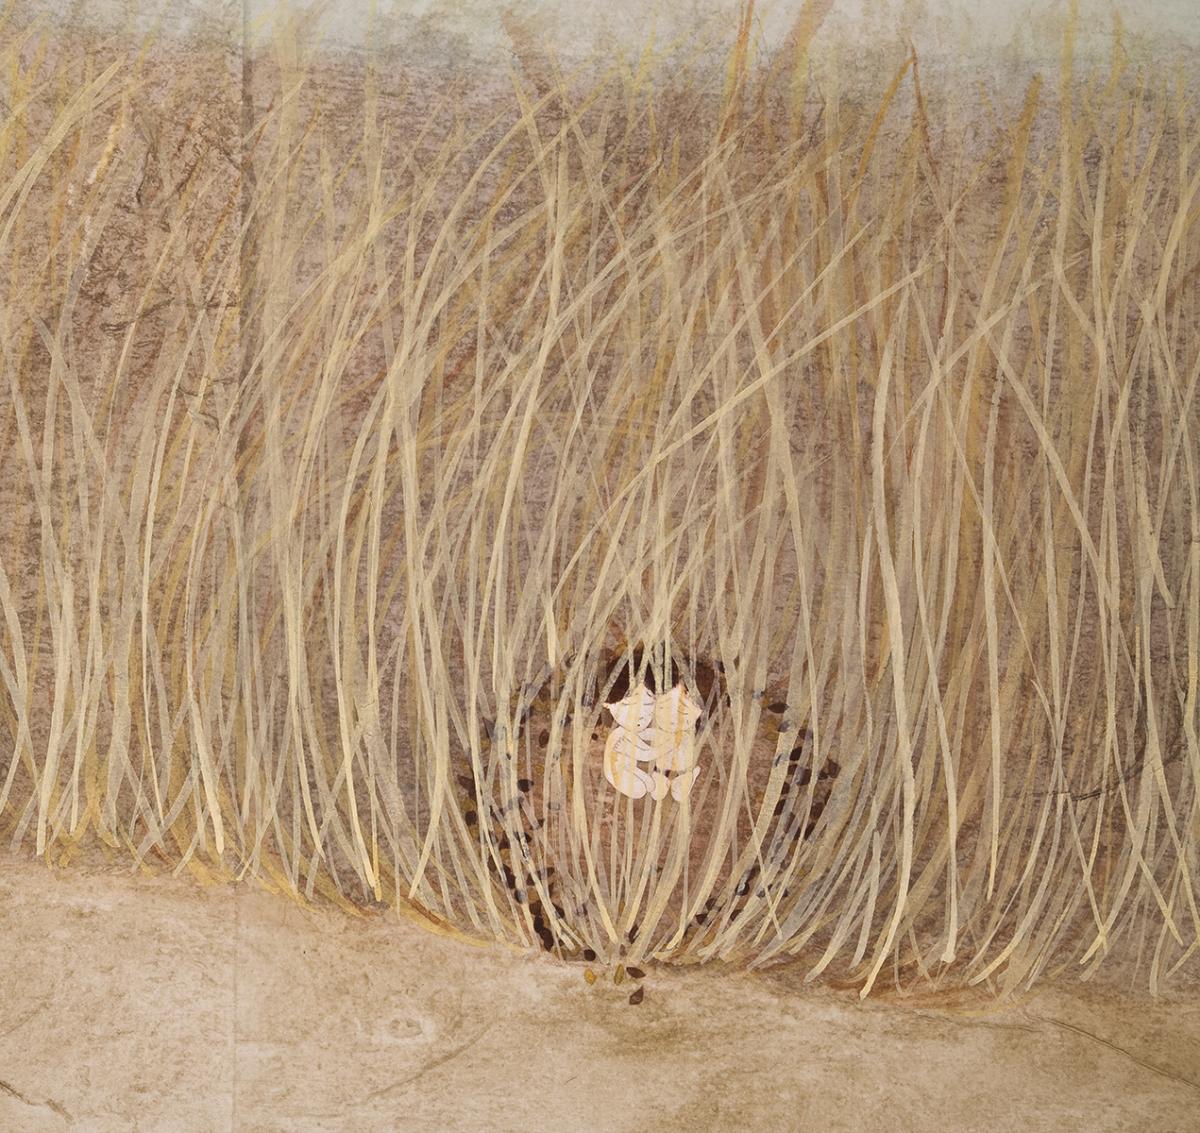 Detail of artwork by Kyung Jeon titled Chapter 9-Curtains of Long Grass Hide Nightmares and Tragic Secrets, 2008, Gouache, graphite, watercolor on rice paper on canvas, 43.75 x 69.75 inches, 111.1 x 177.2 cm